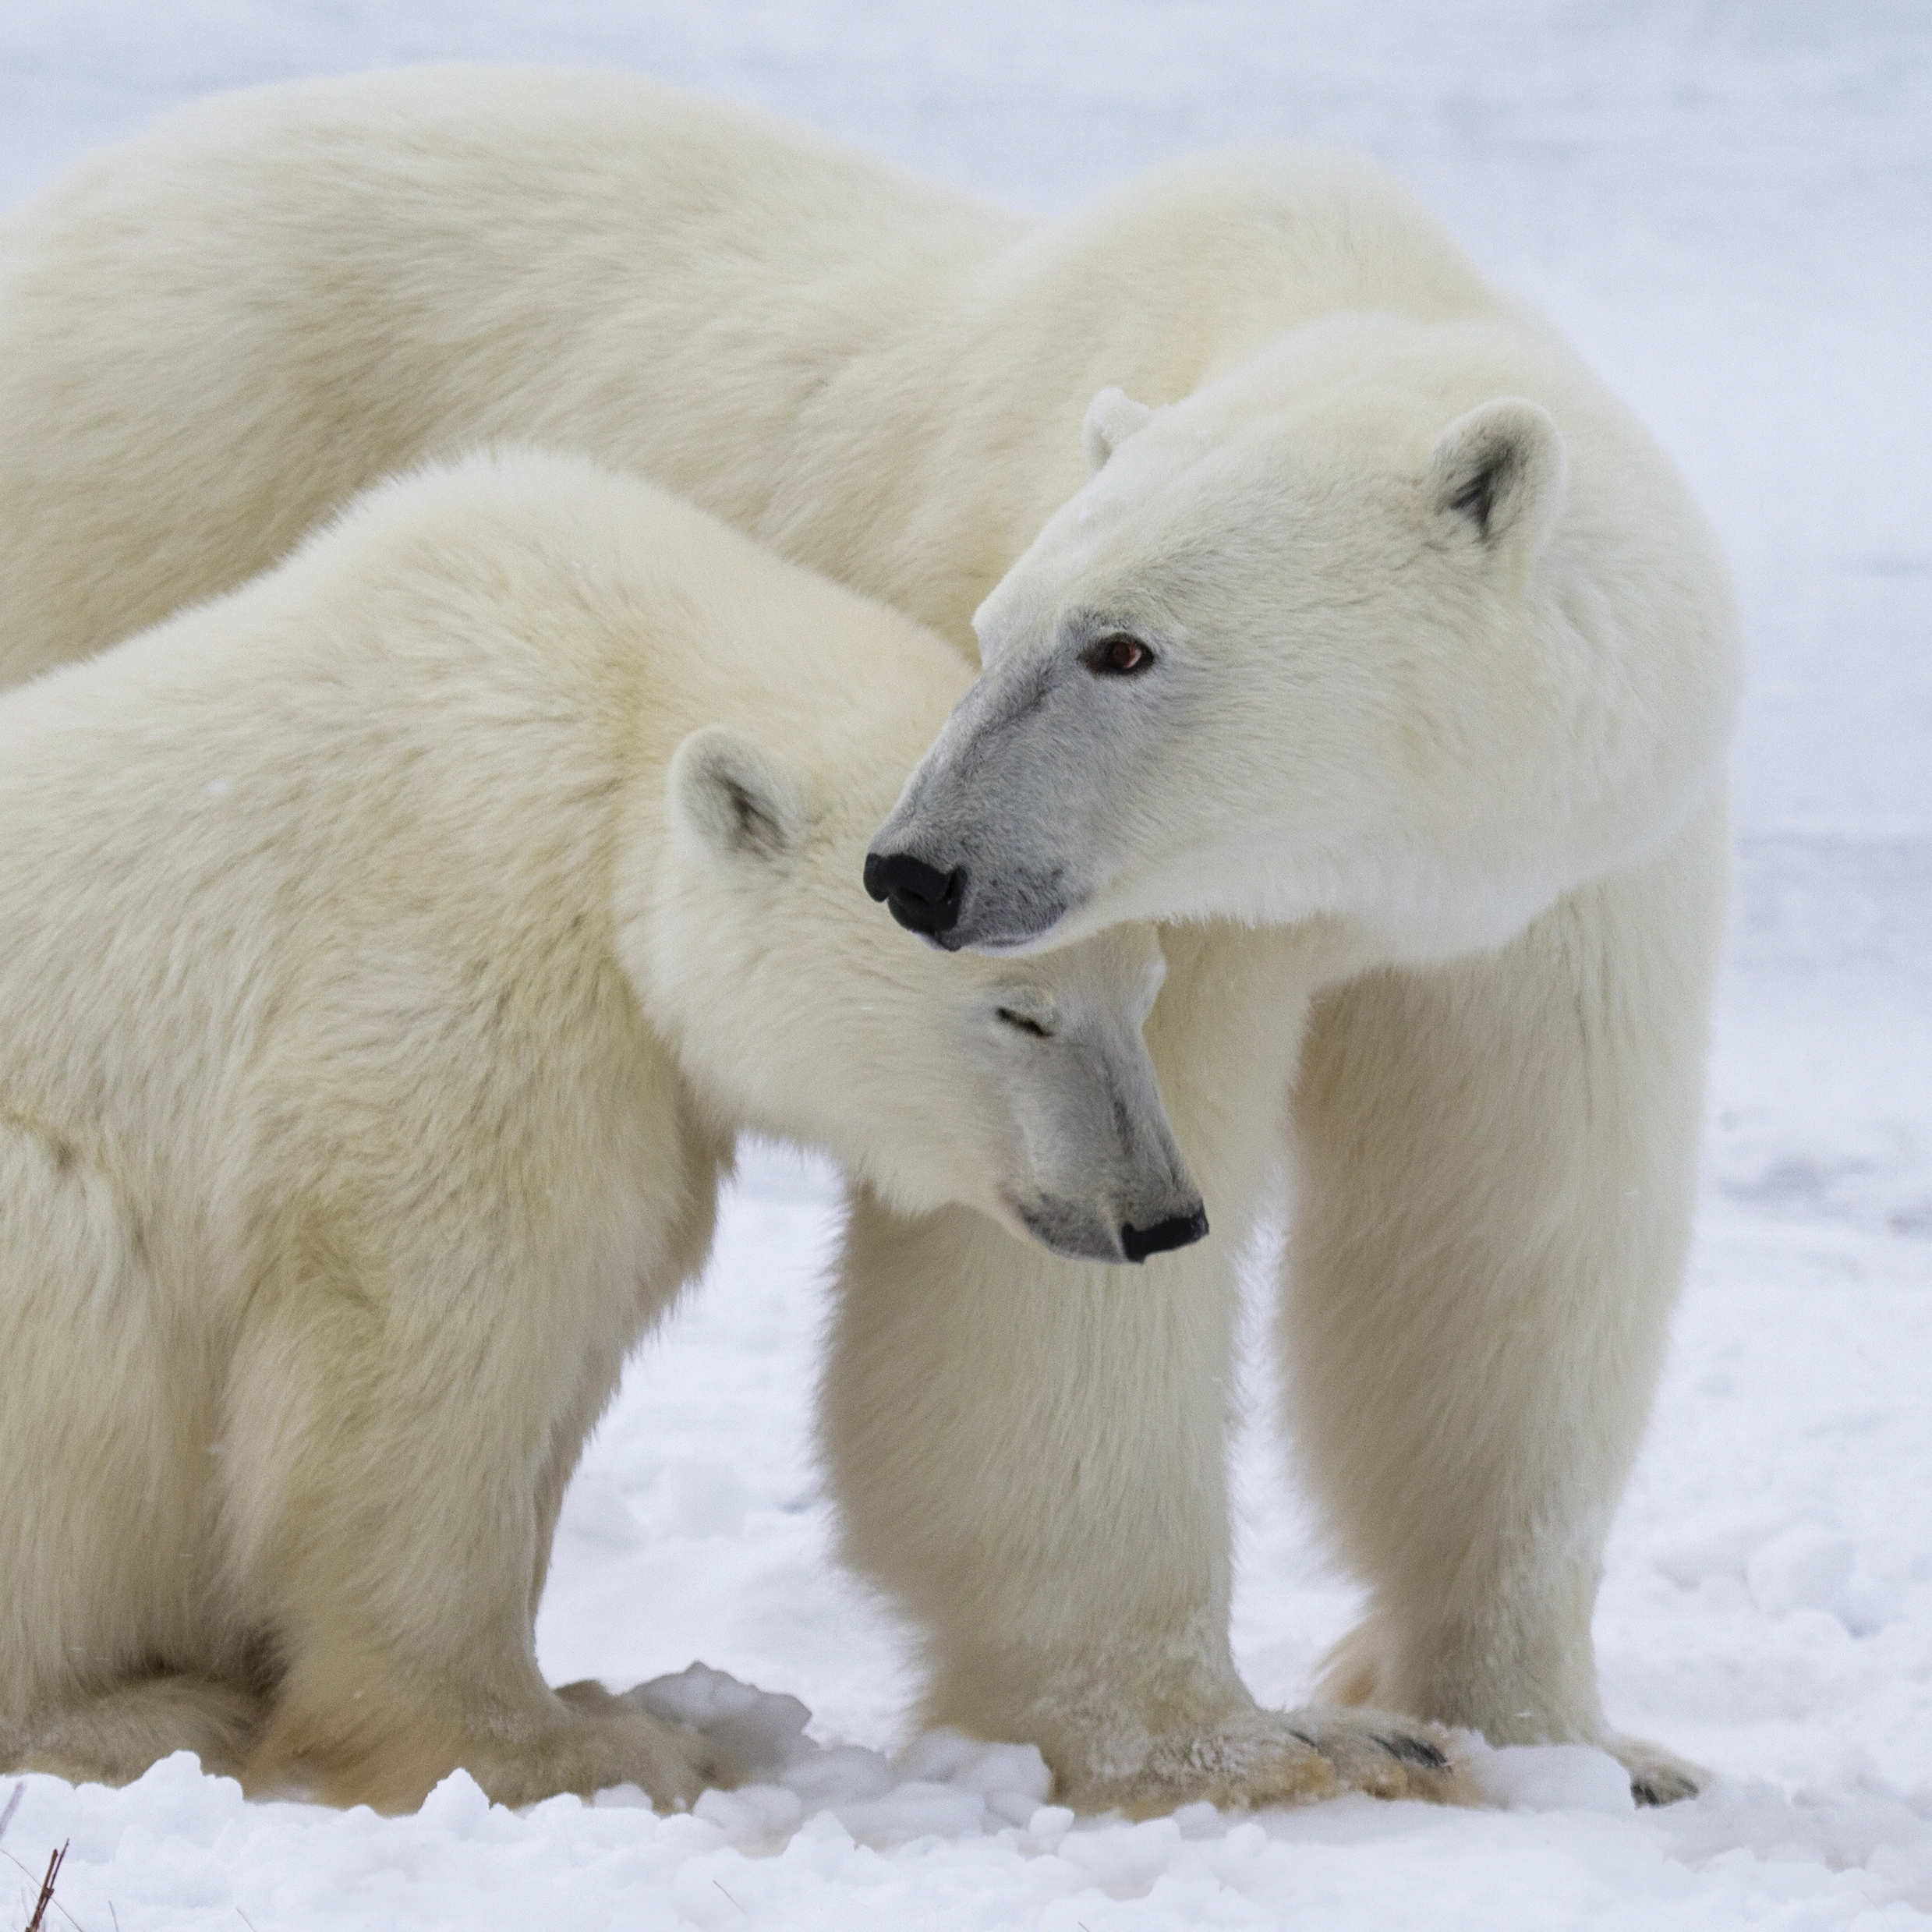 25 Surprising Facts About Polar Bears - 24/7 Wall St.